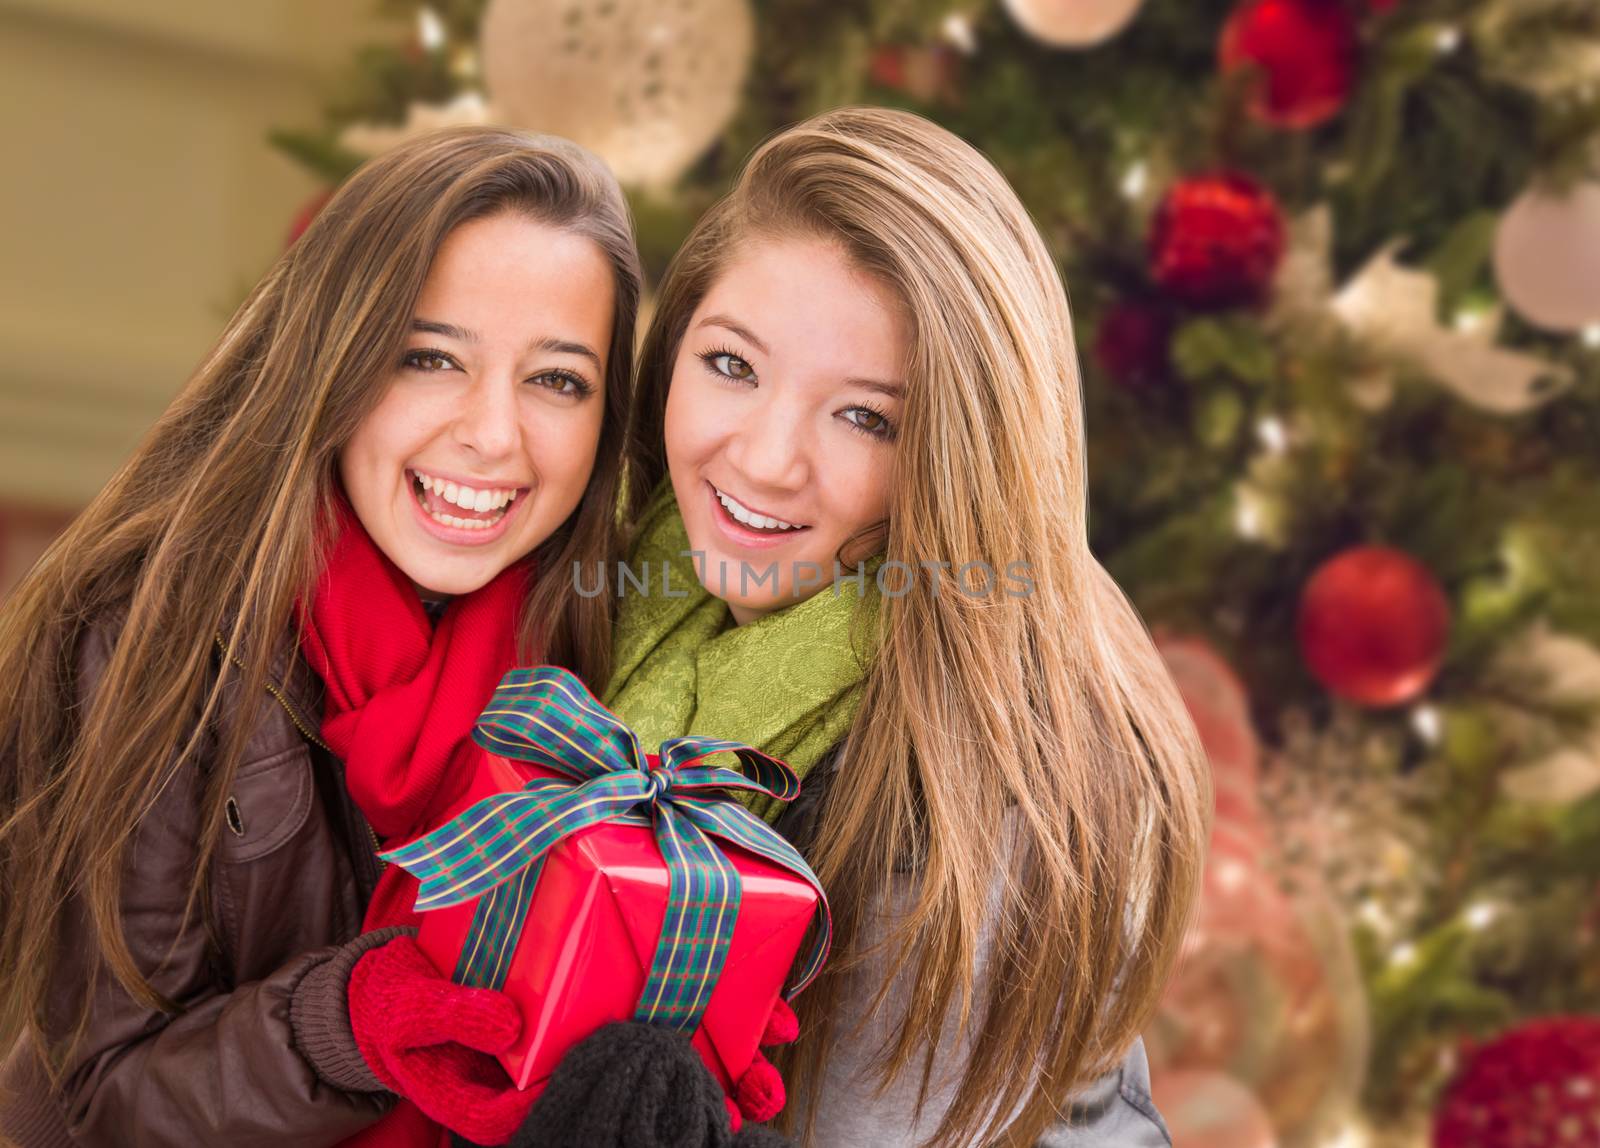 Mixed Race Young Adult Females Holding A Christmas Gift In Front Of Decorated Tree by Feverpitched